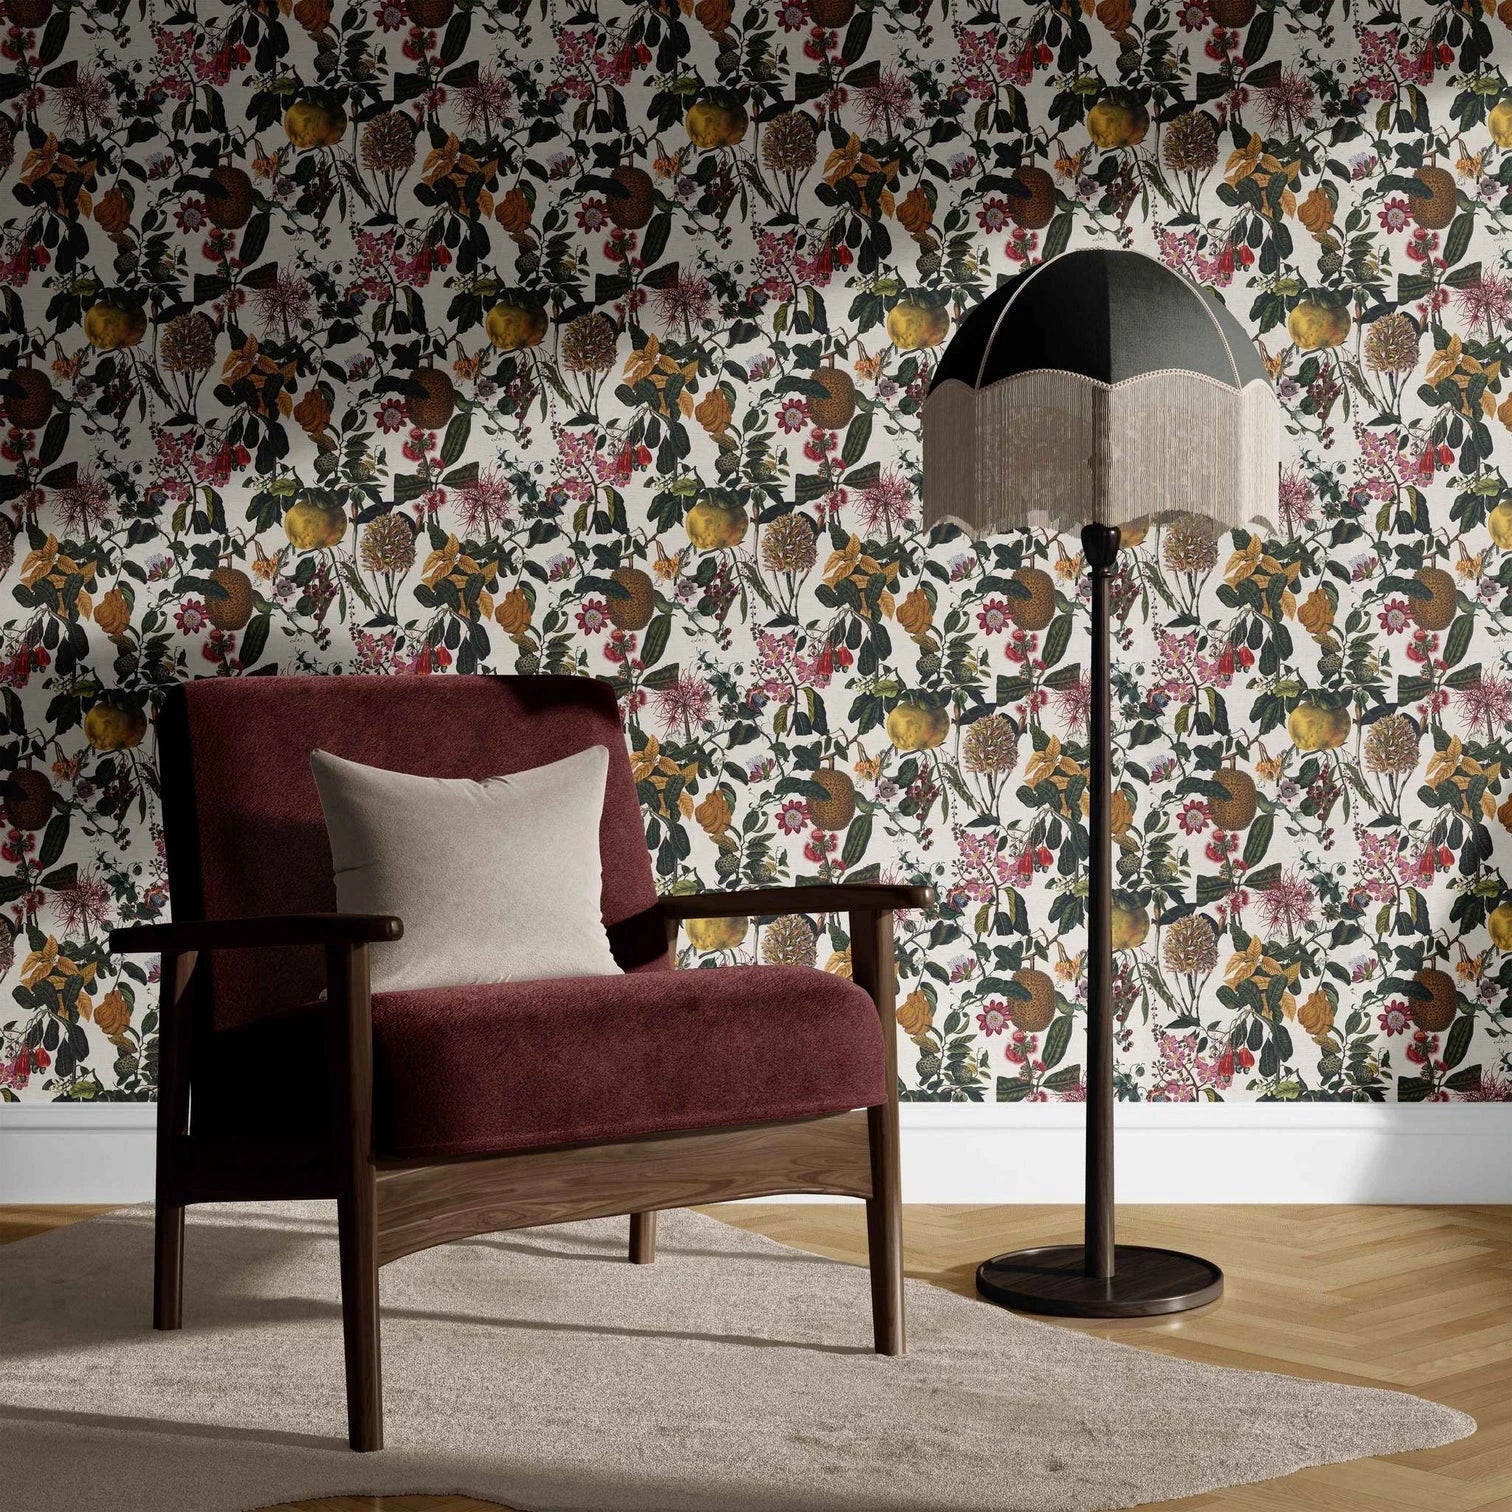 Dark green wallpaper with hanging florals in pink